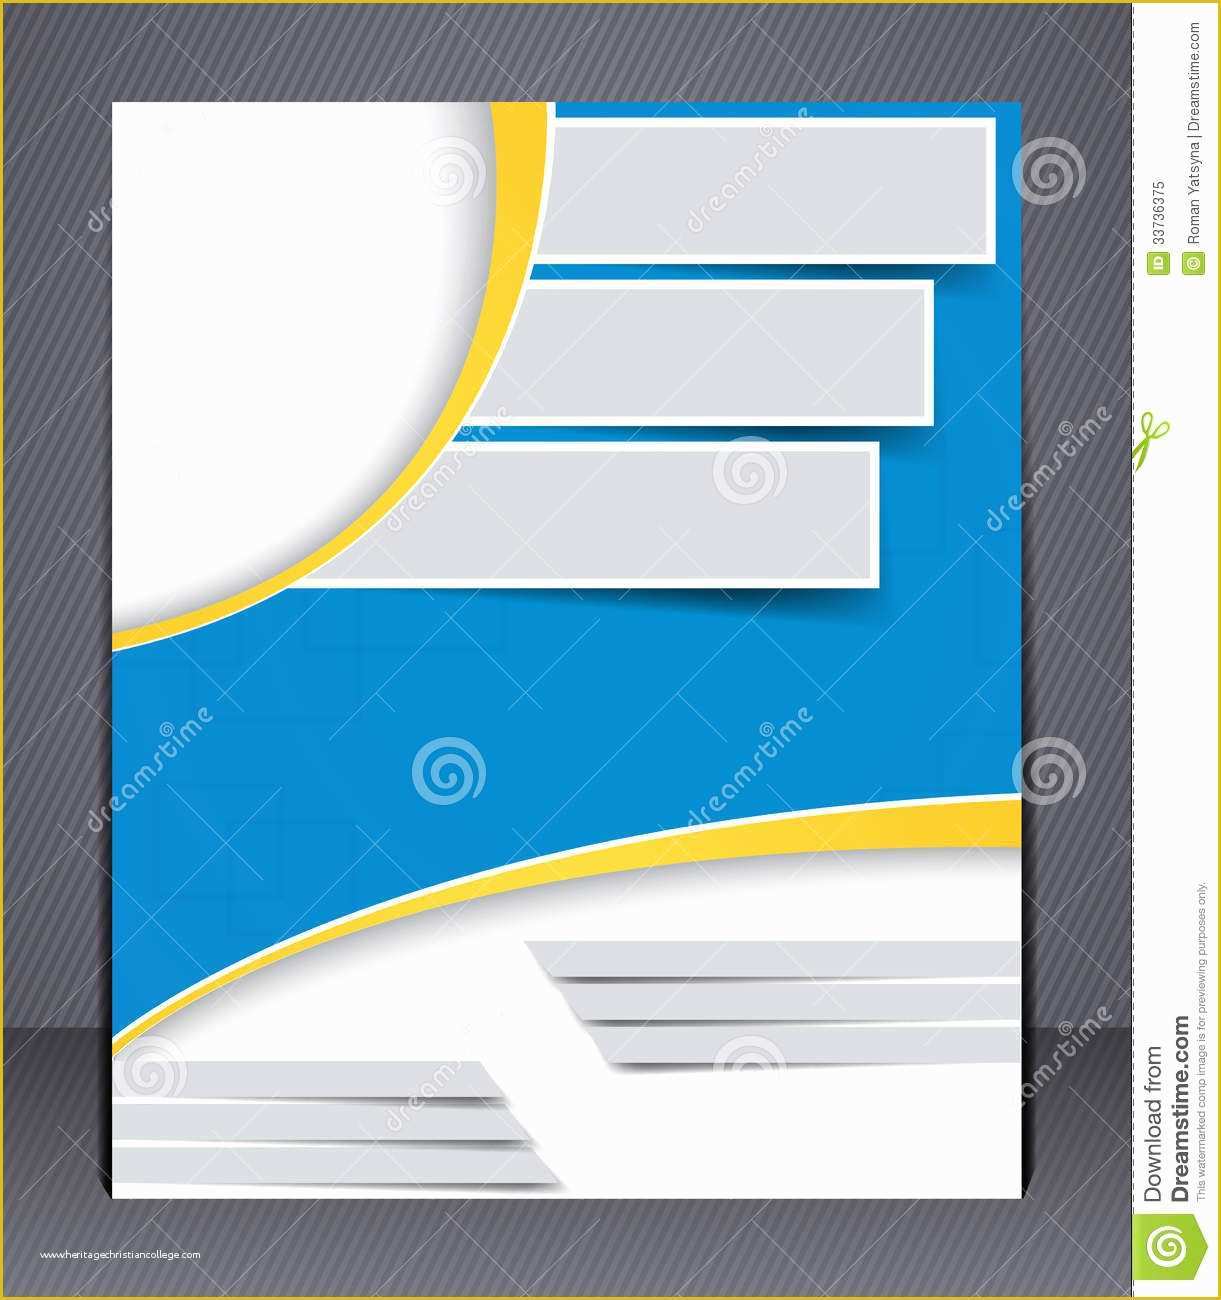 Free Flyer Design Templates Of Brochure Design In Blue and Yellow Colors Stock Vector